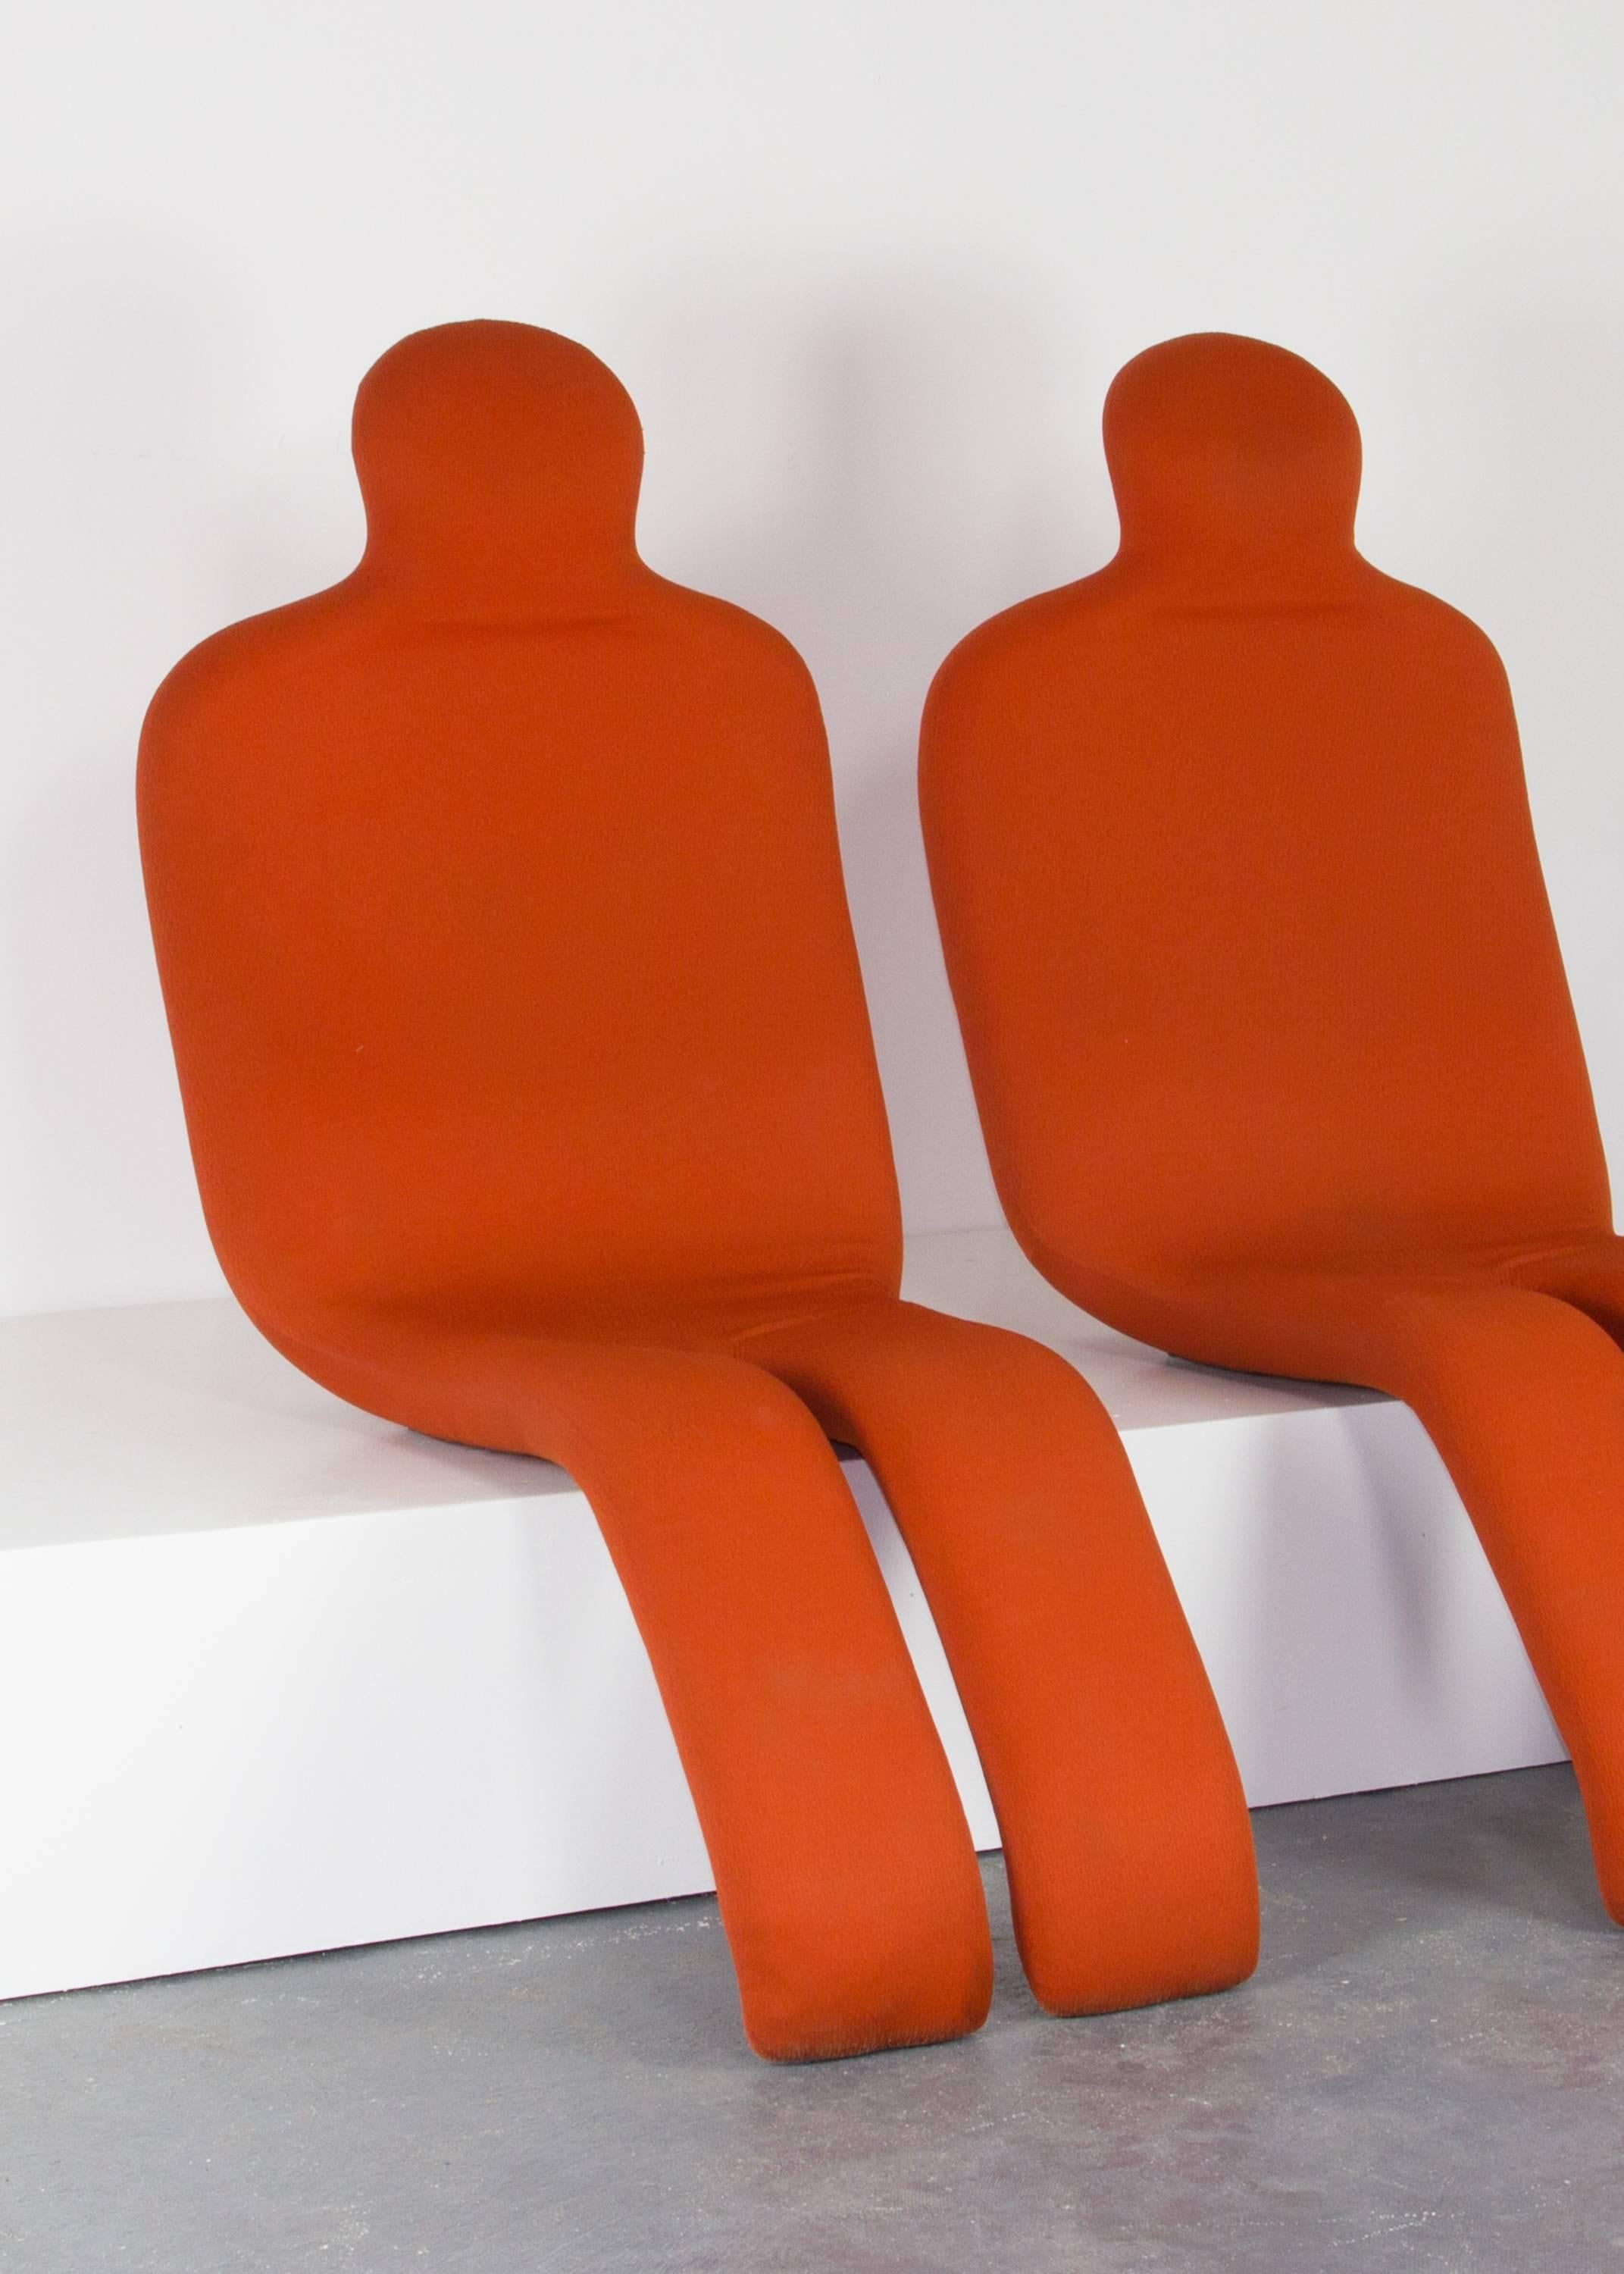 Bouloum lounge chairs by Olivier Mourgue for Arconas, upholstered in original orange-red fabric and perfectly form fitting. (One available)
 